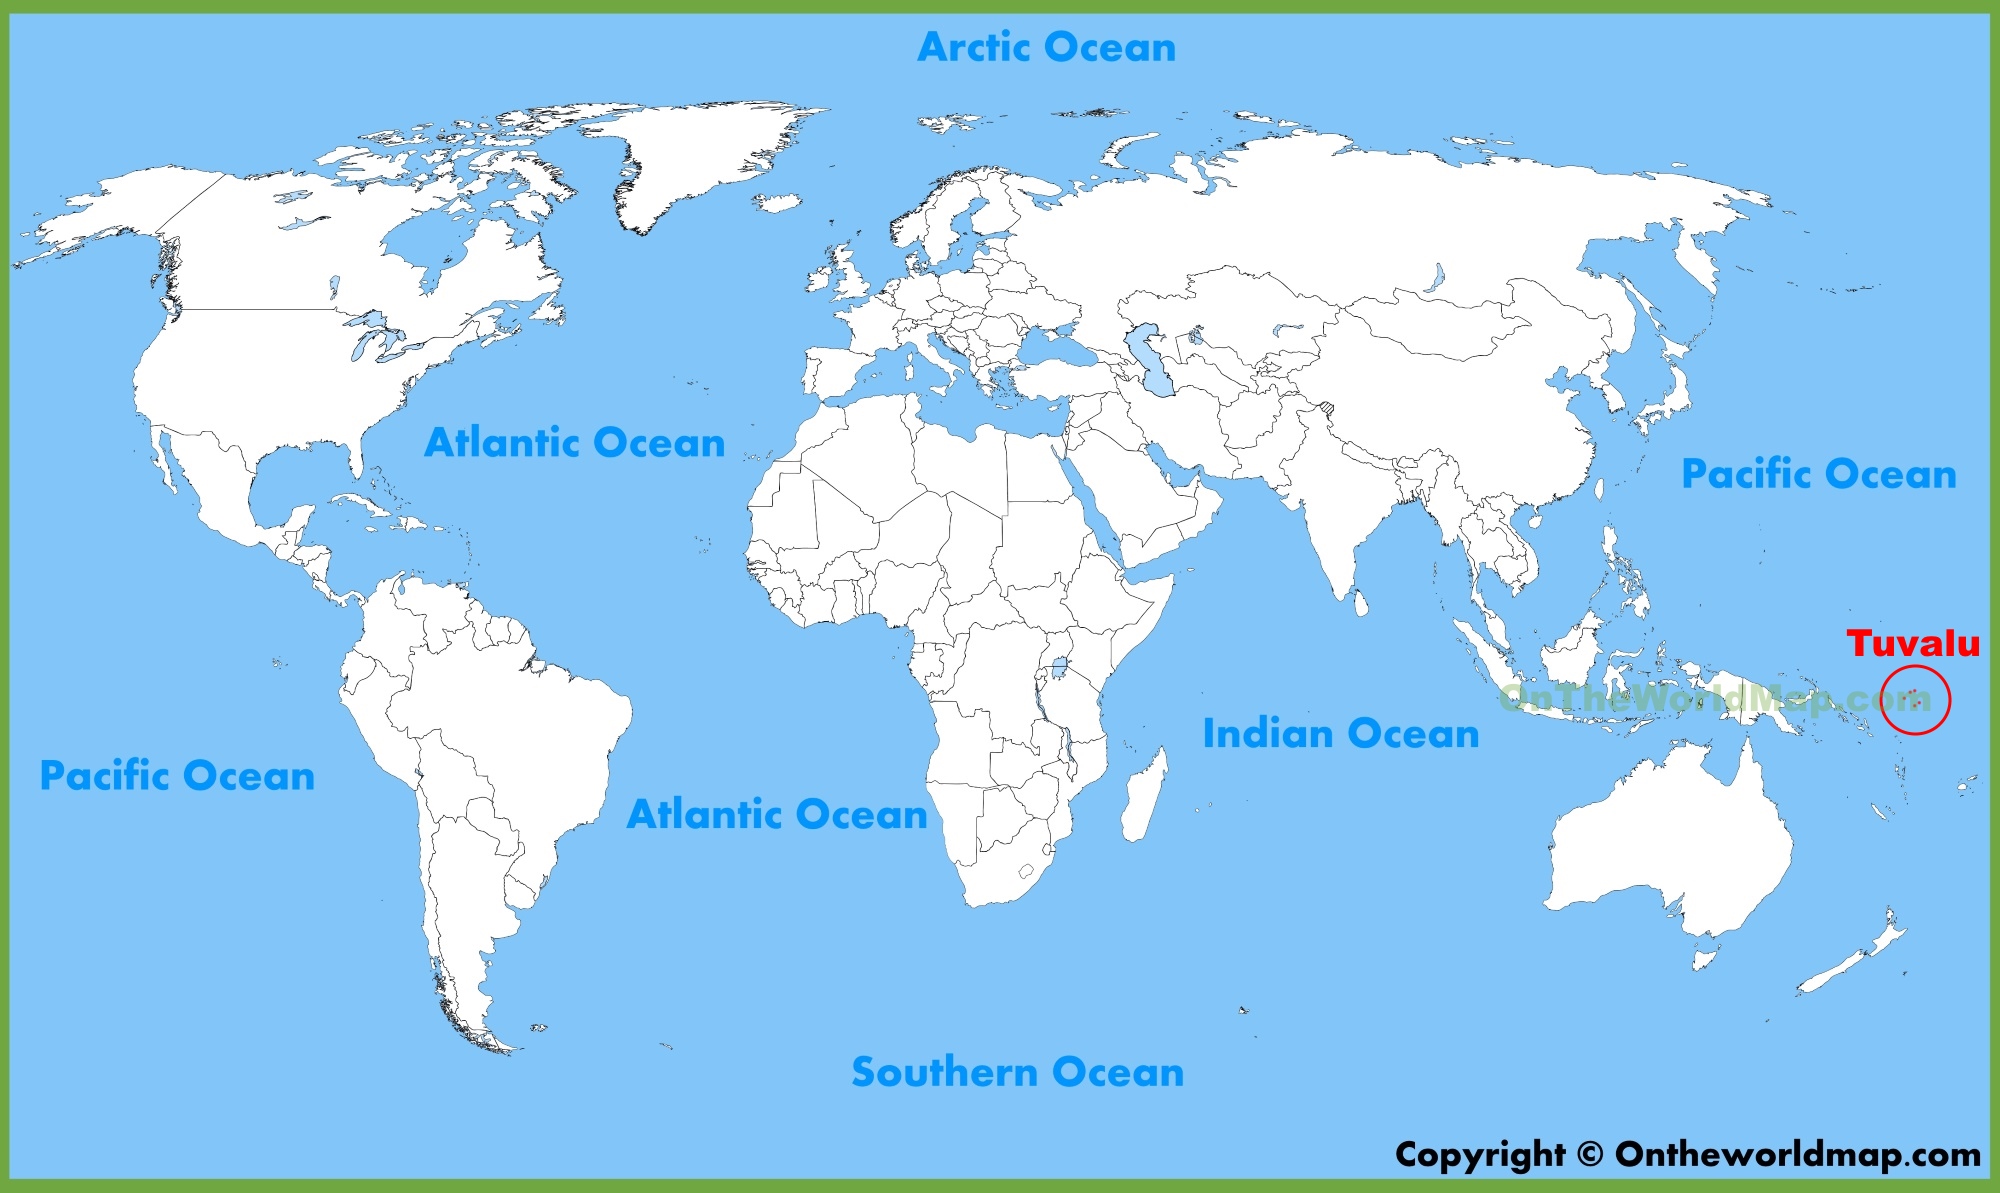 where is tuvalu located on the world map Tuvalu Location On The World Map where is tuvalu located on the world map